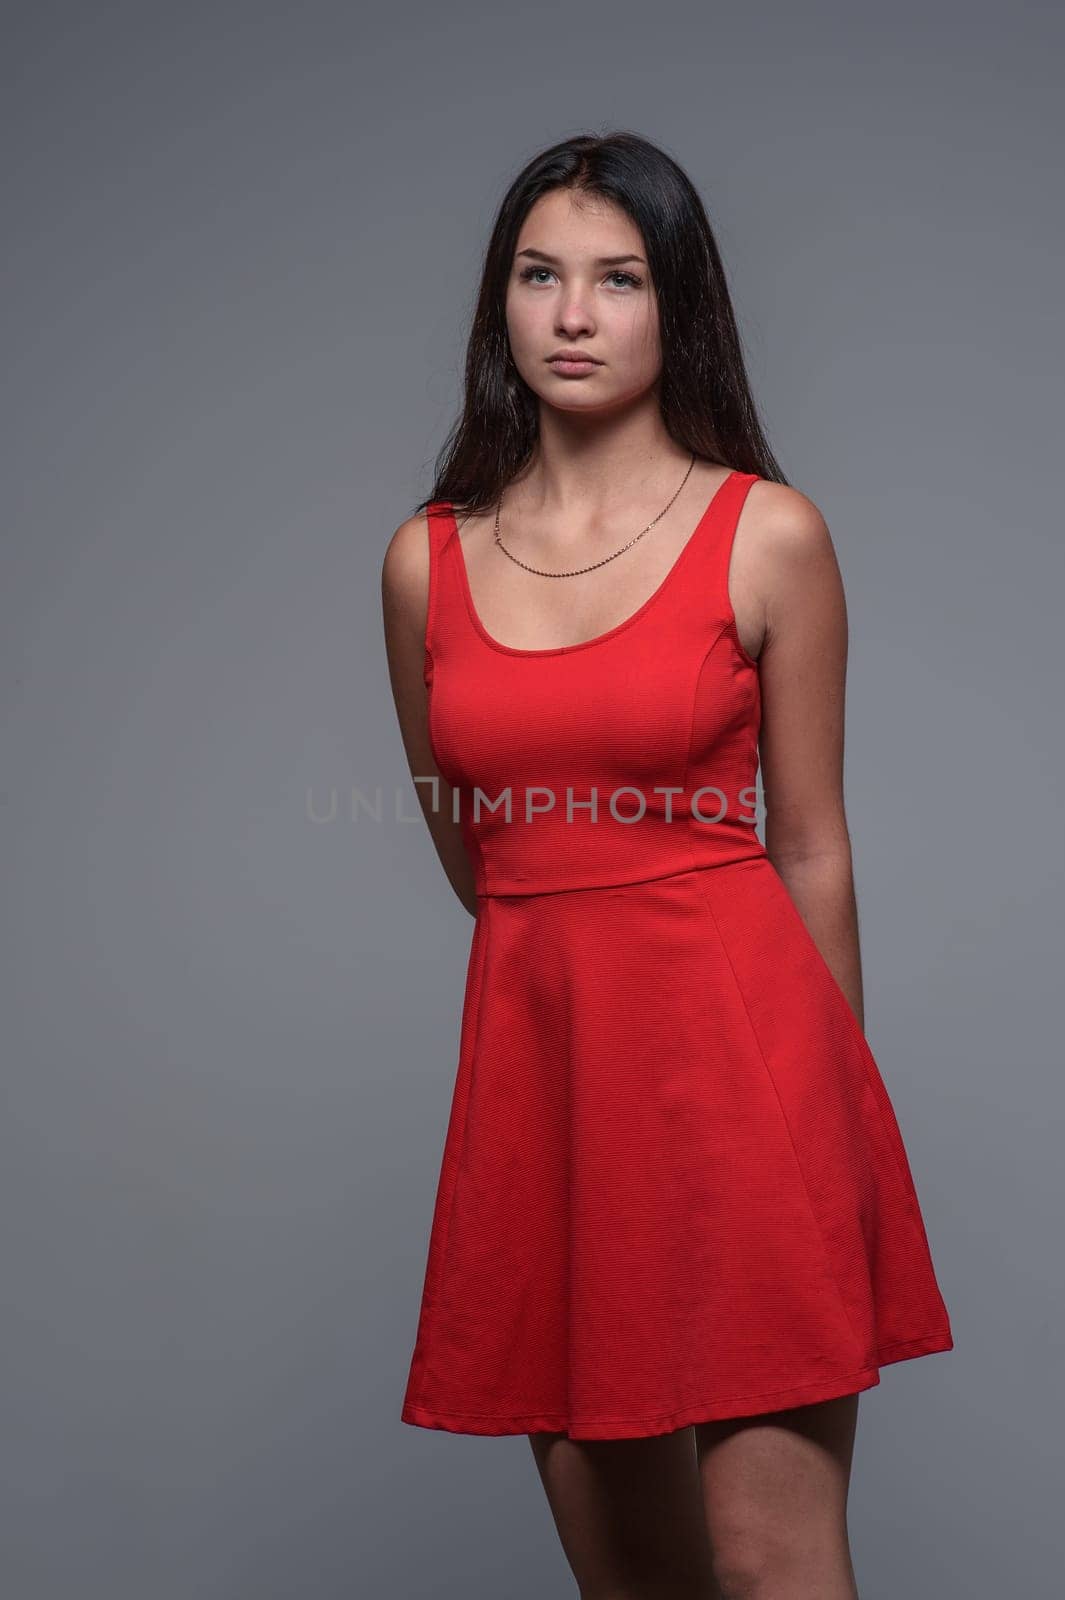 Studio portrait of a young beautiful girl in a red dress 1 by Mixa74